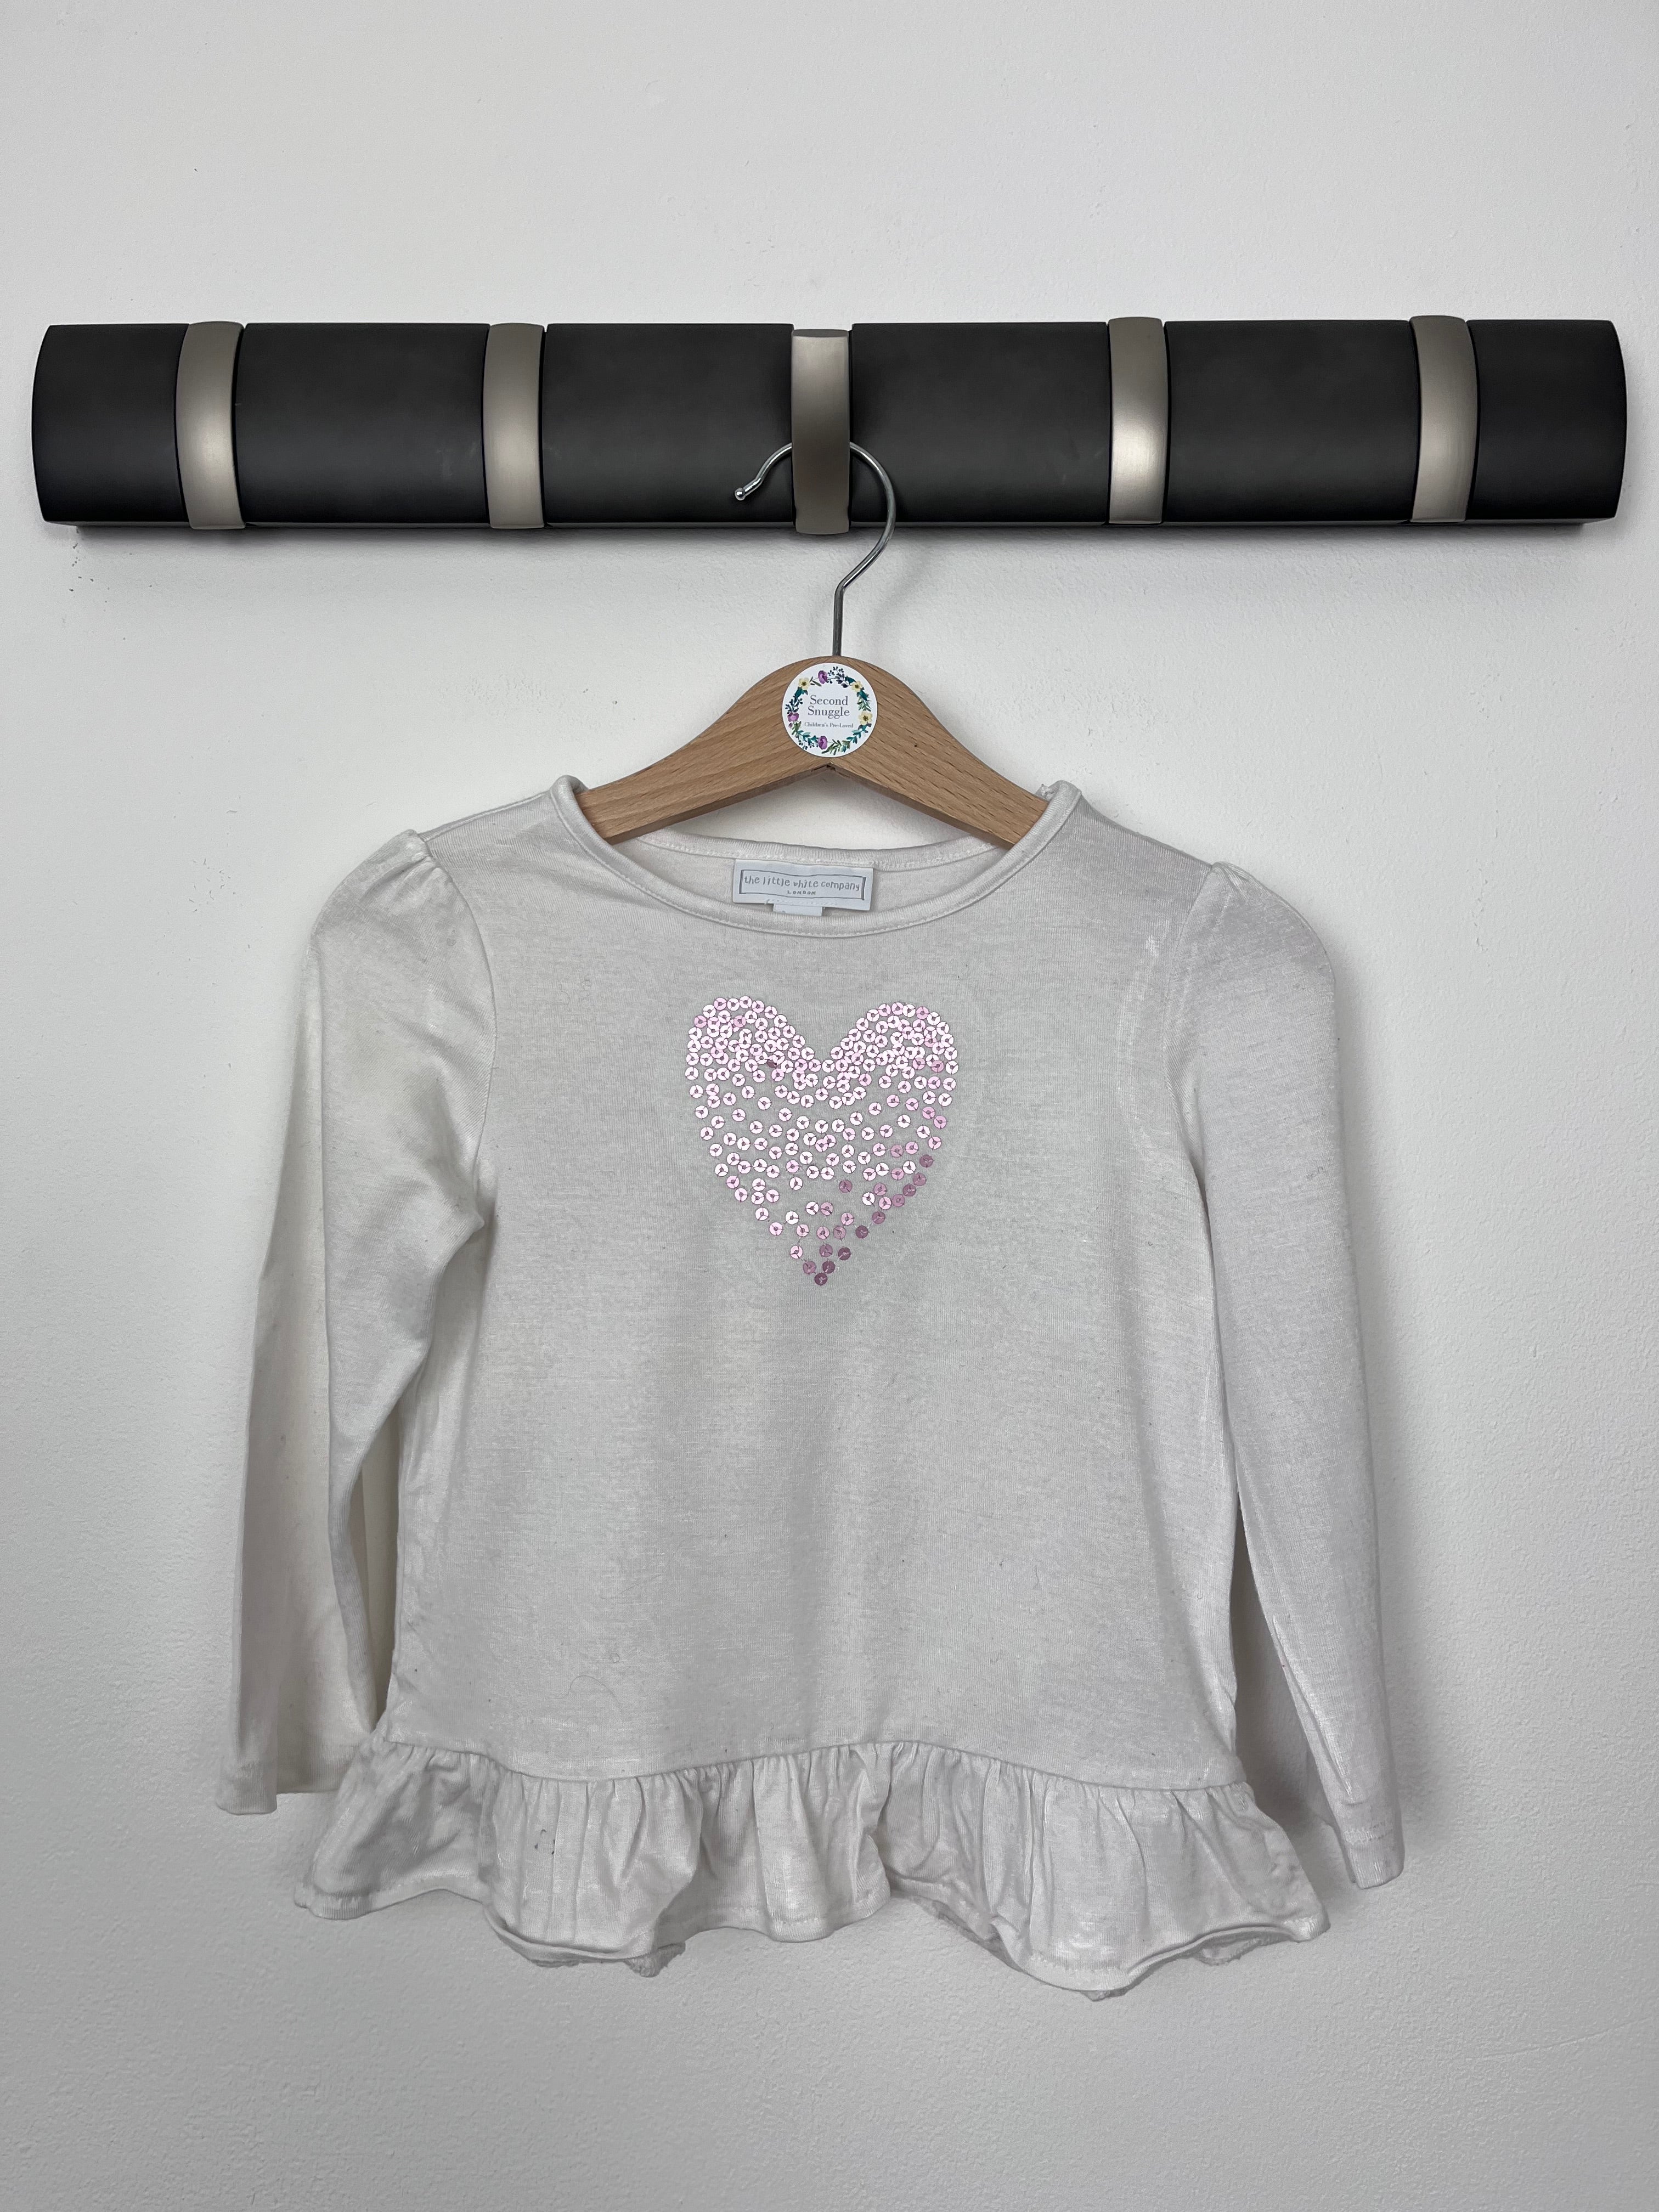 The Little White Company 12-18 Months-Tops-Second Snuggle Preloved